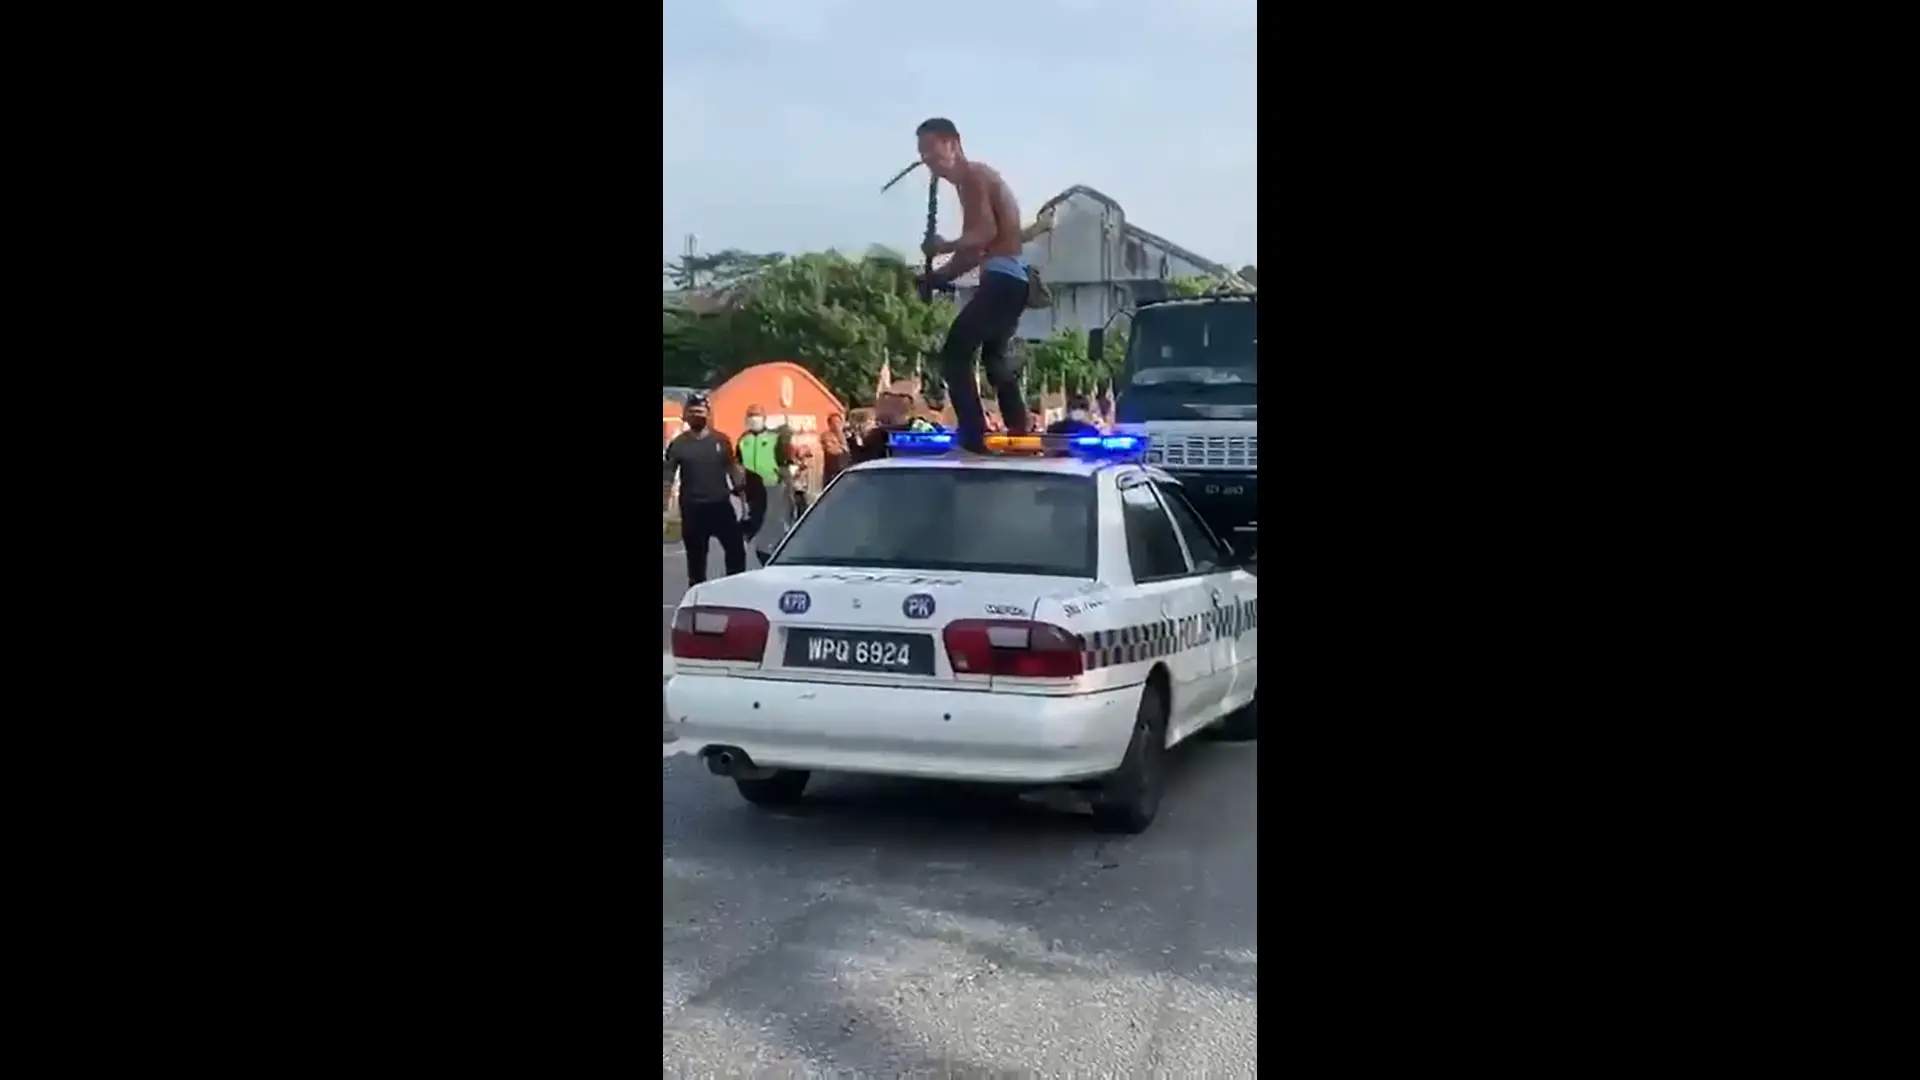 Man runs amok, swinging a parang while standing on top of a police car